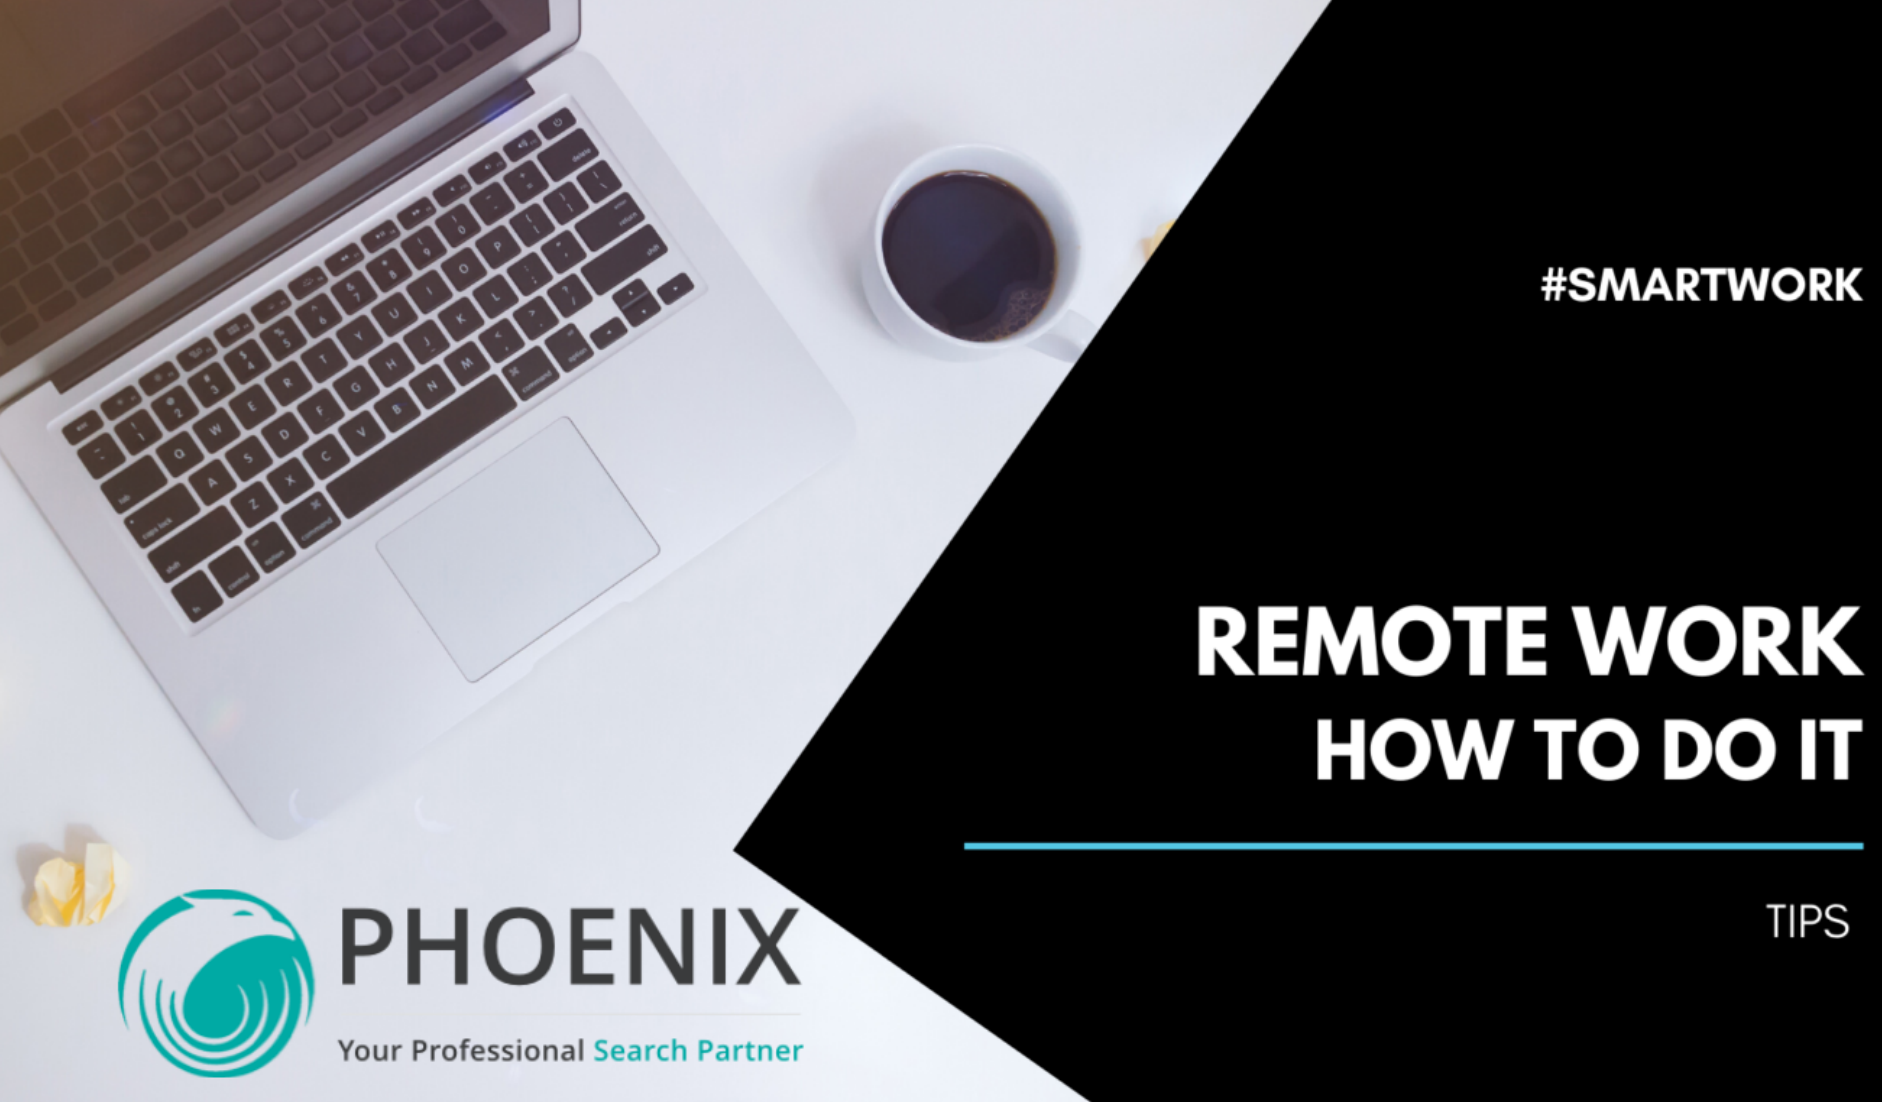 Phoenix Remote Work Expert Tips For Employers & Employees